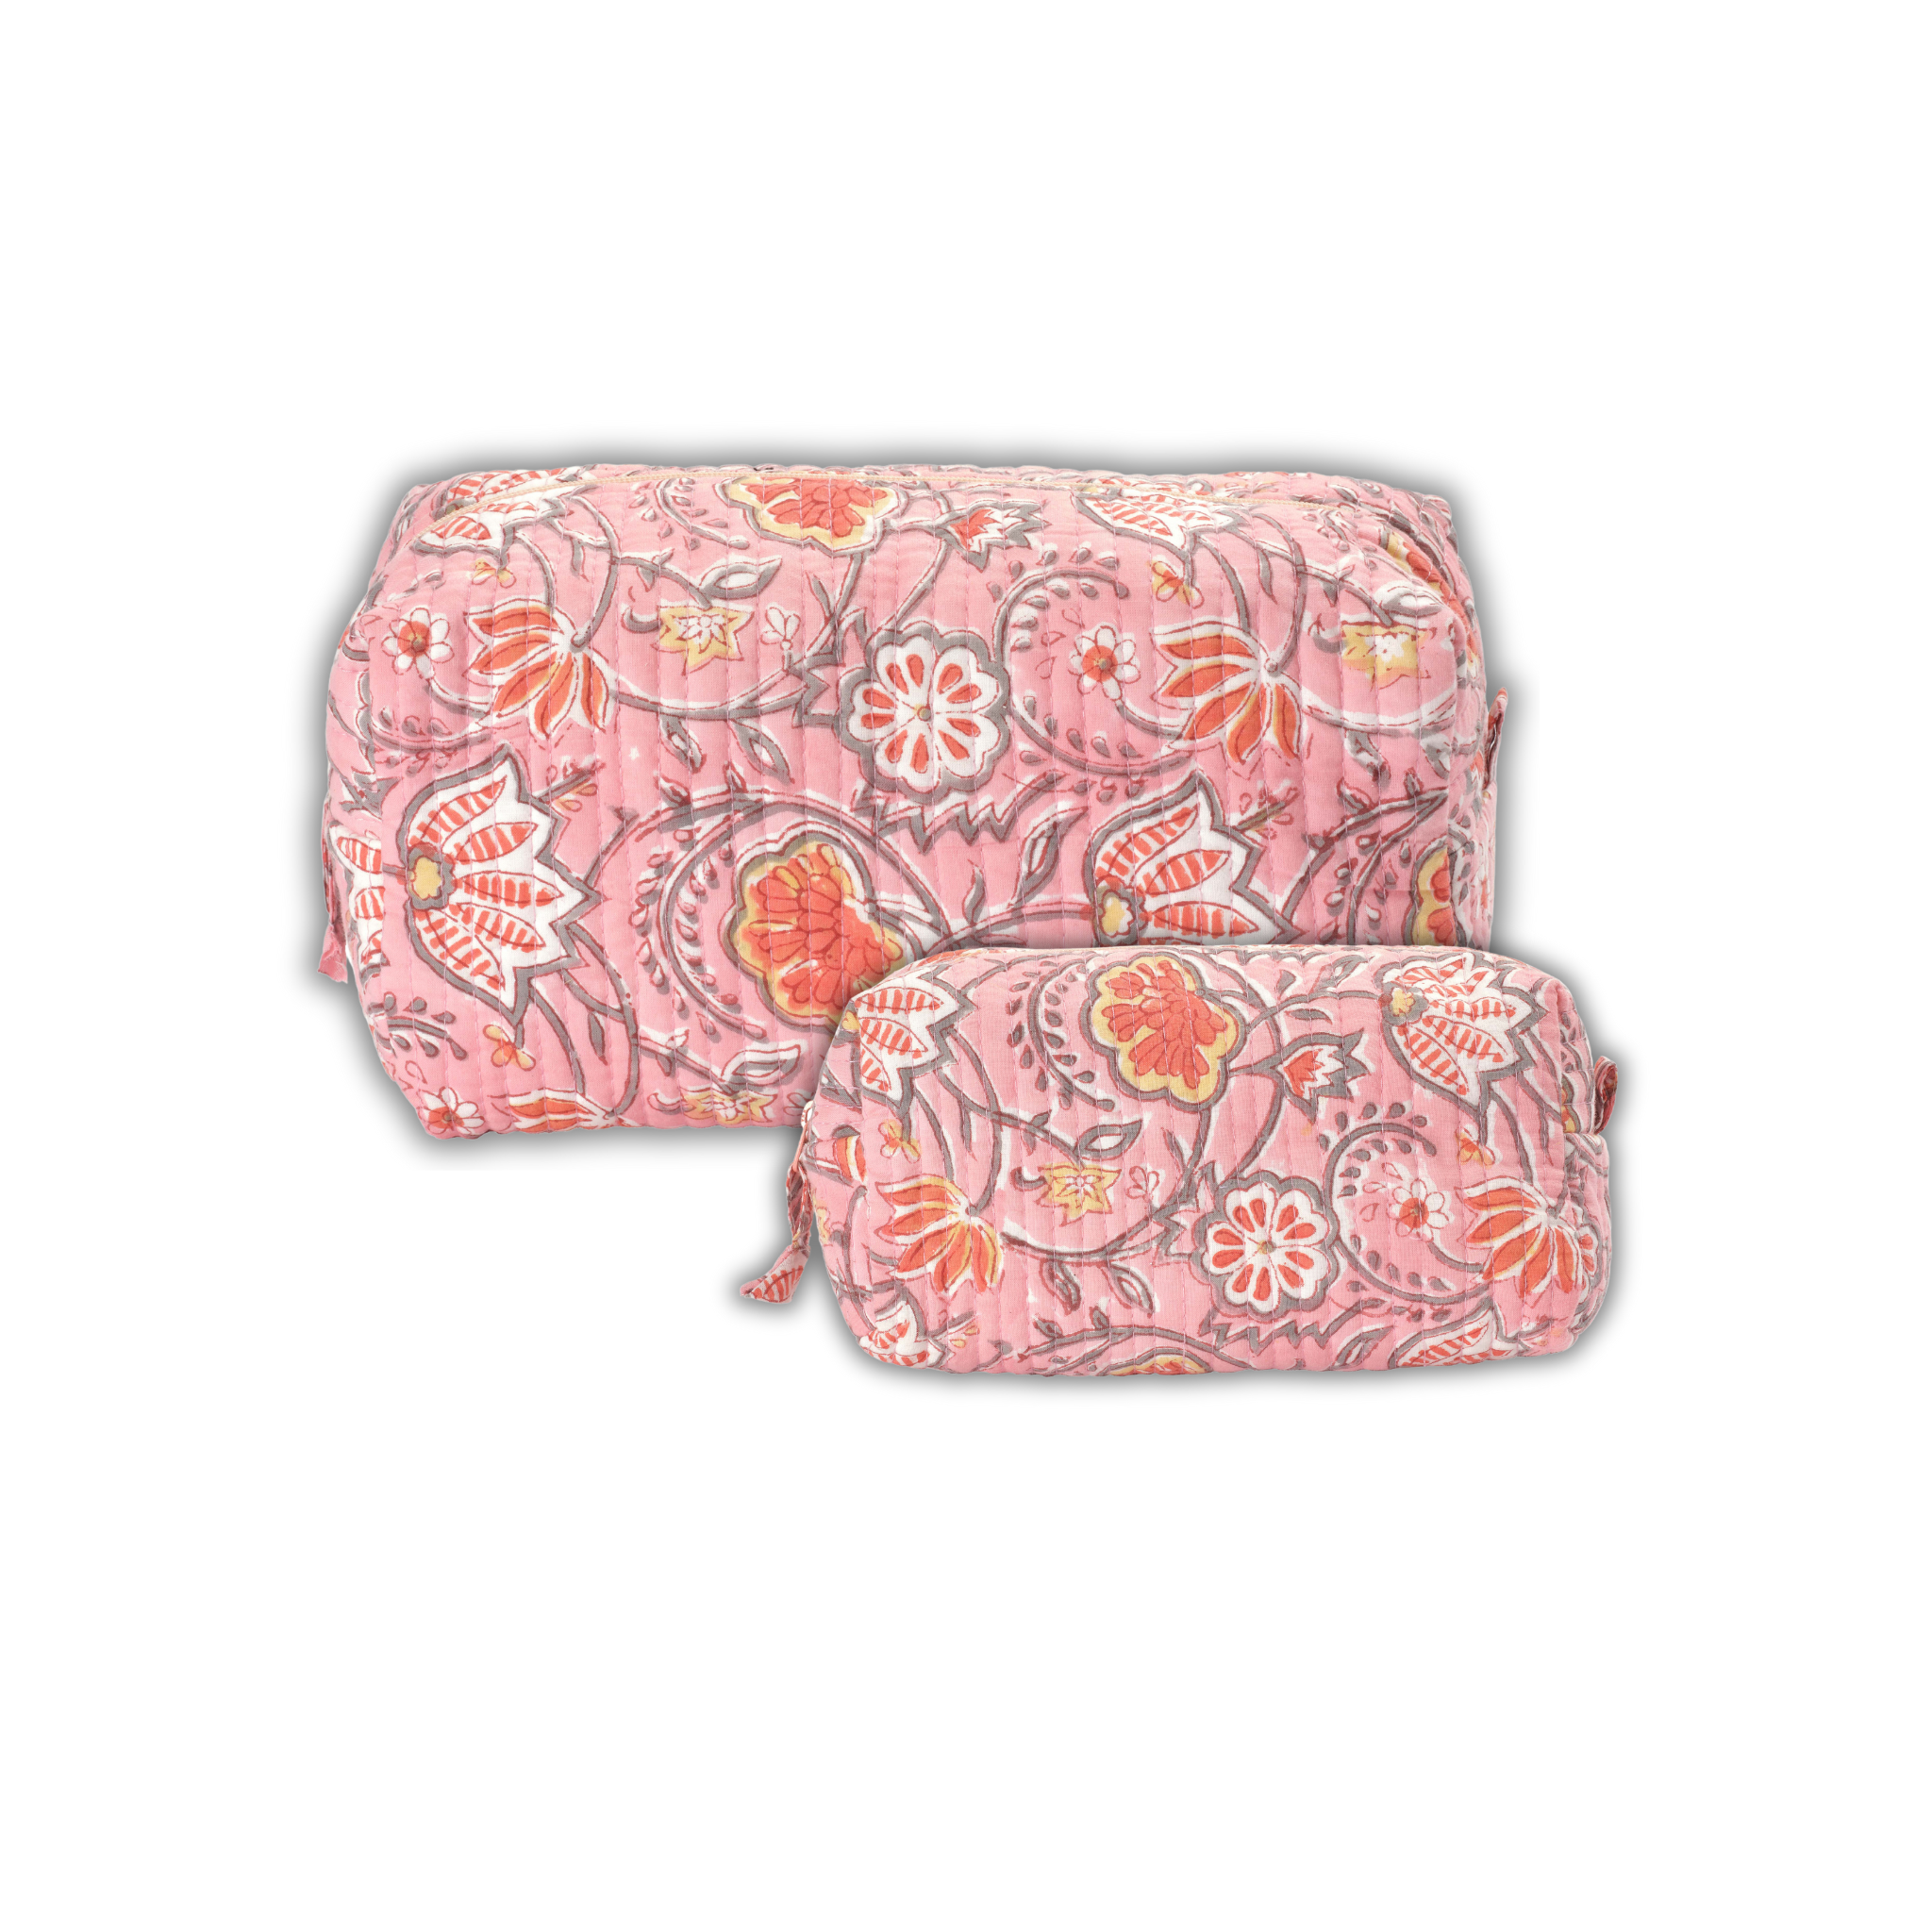 Jaya Cosmetic Purse + Large Cosmetic Bag Coral with Flower